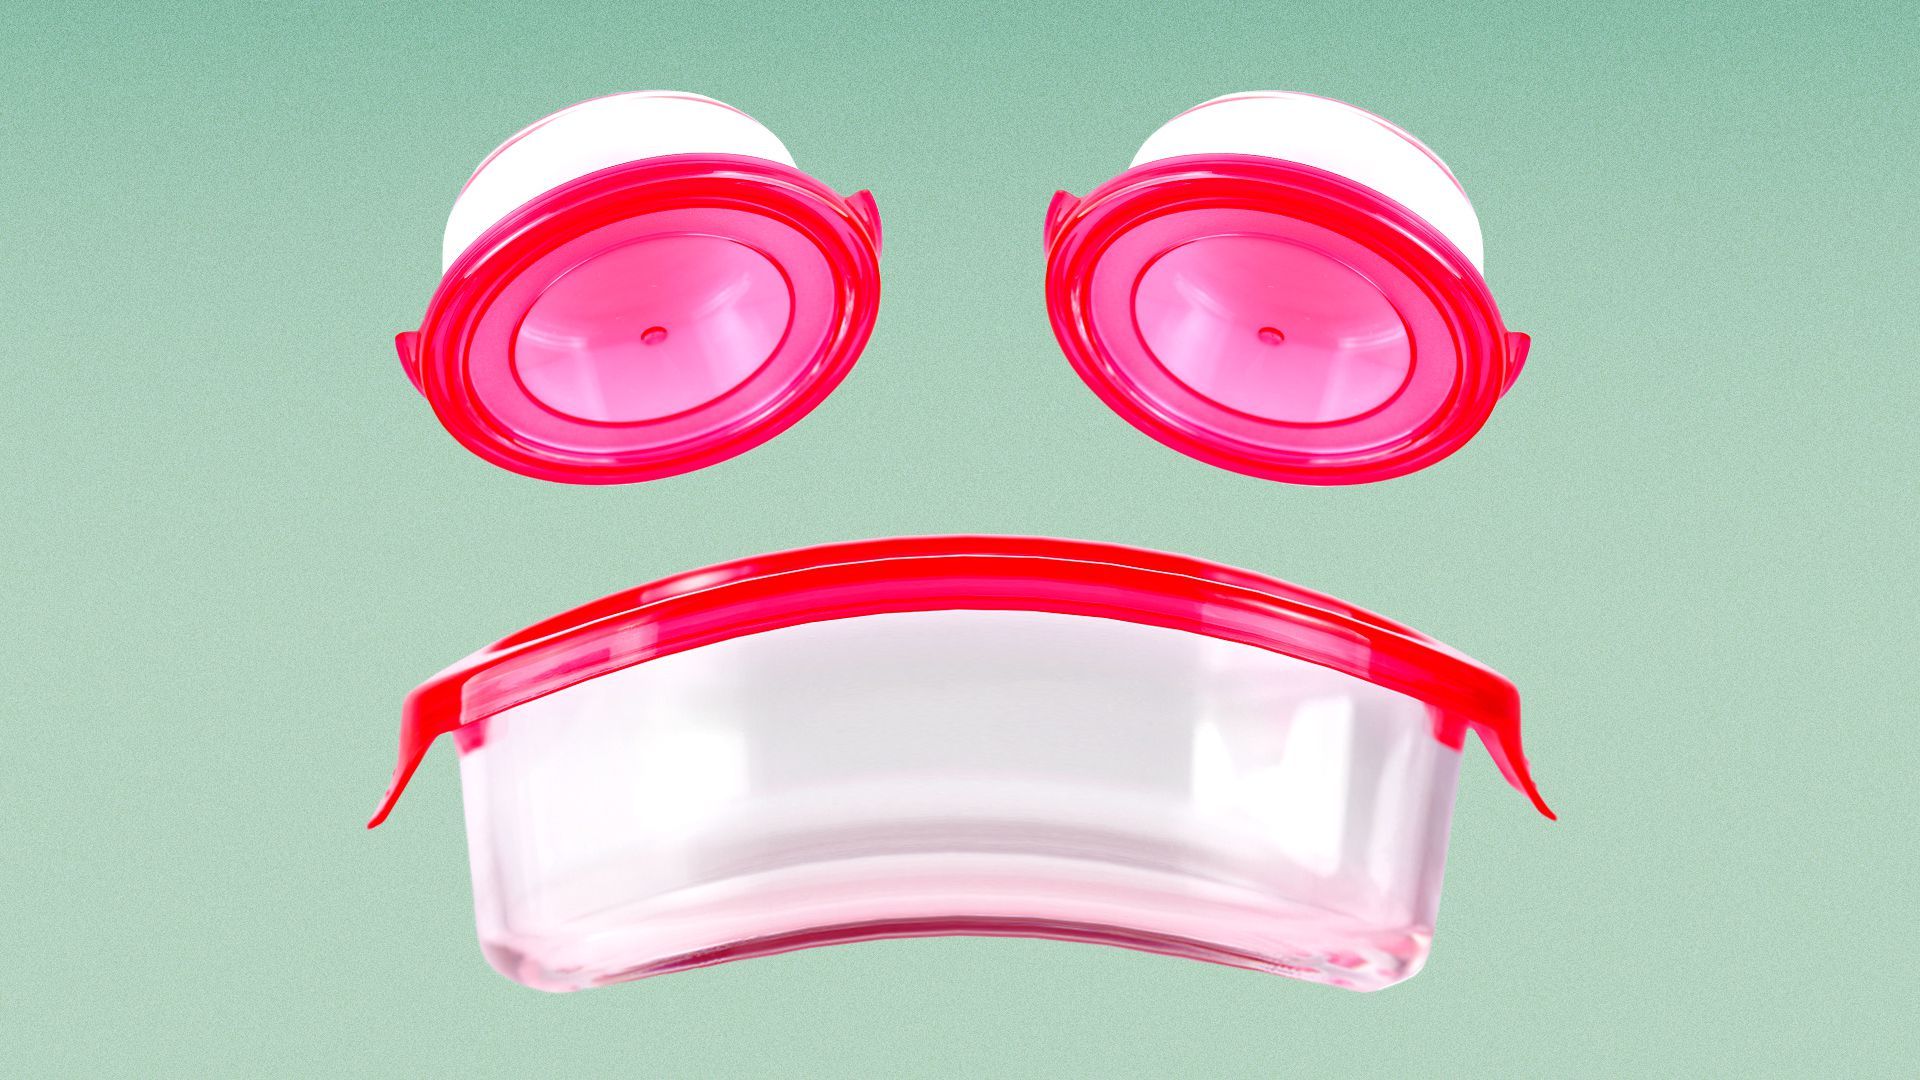 Illustration of three Tupperware containers curved to form a sad face